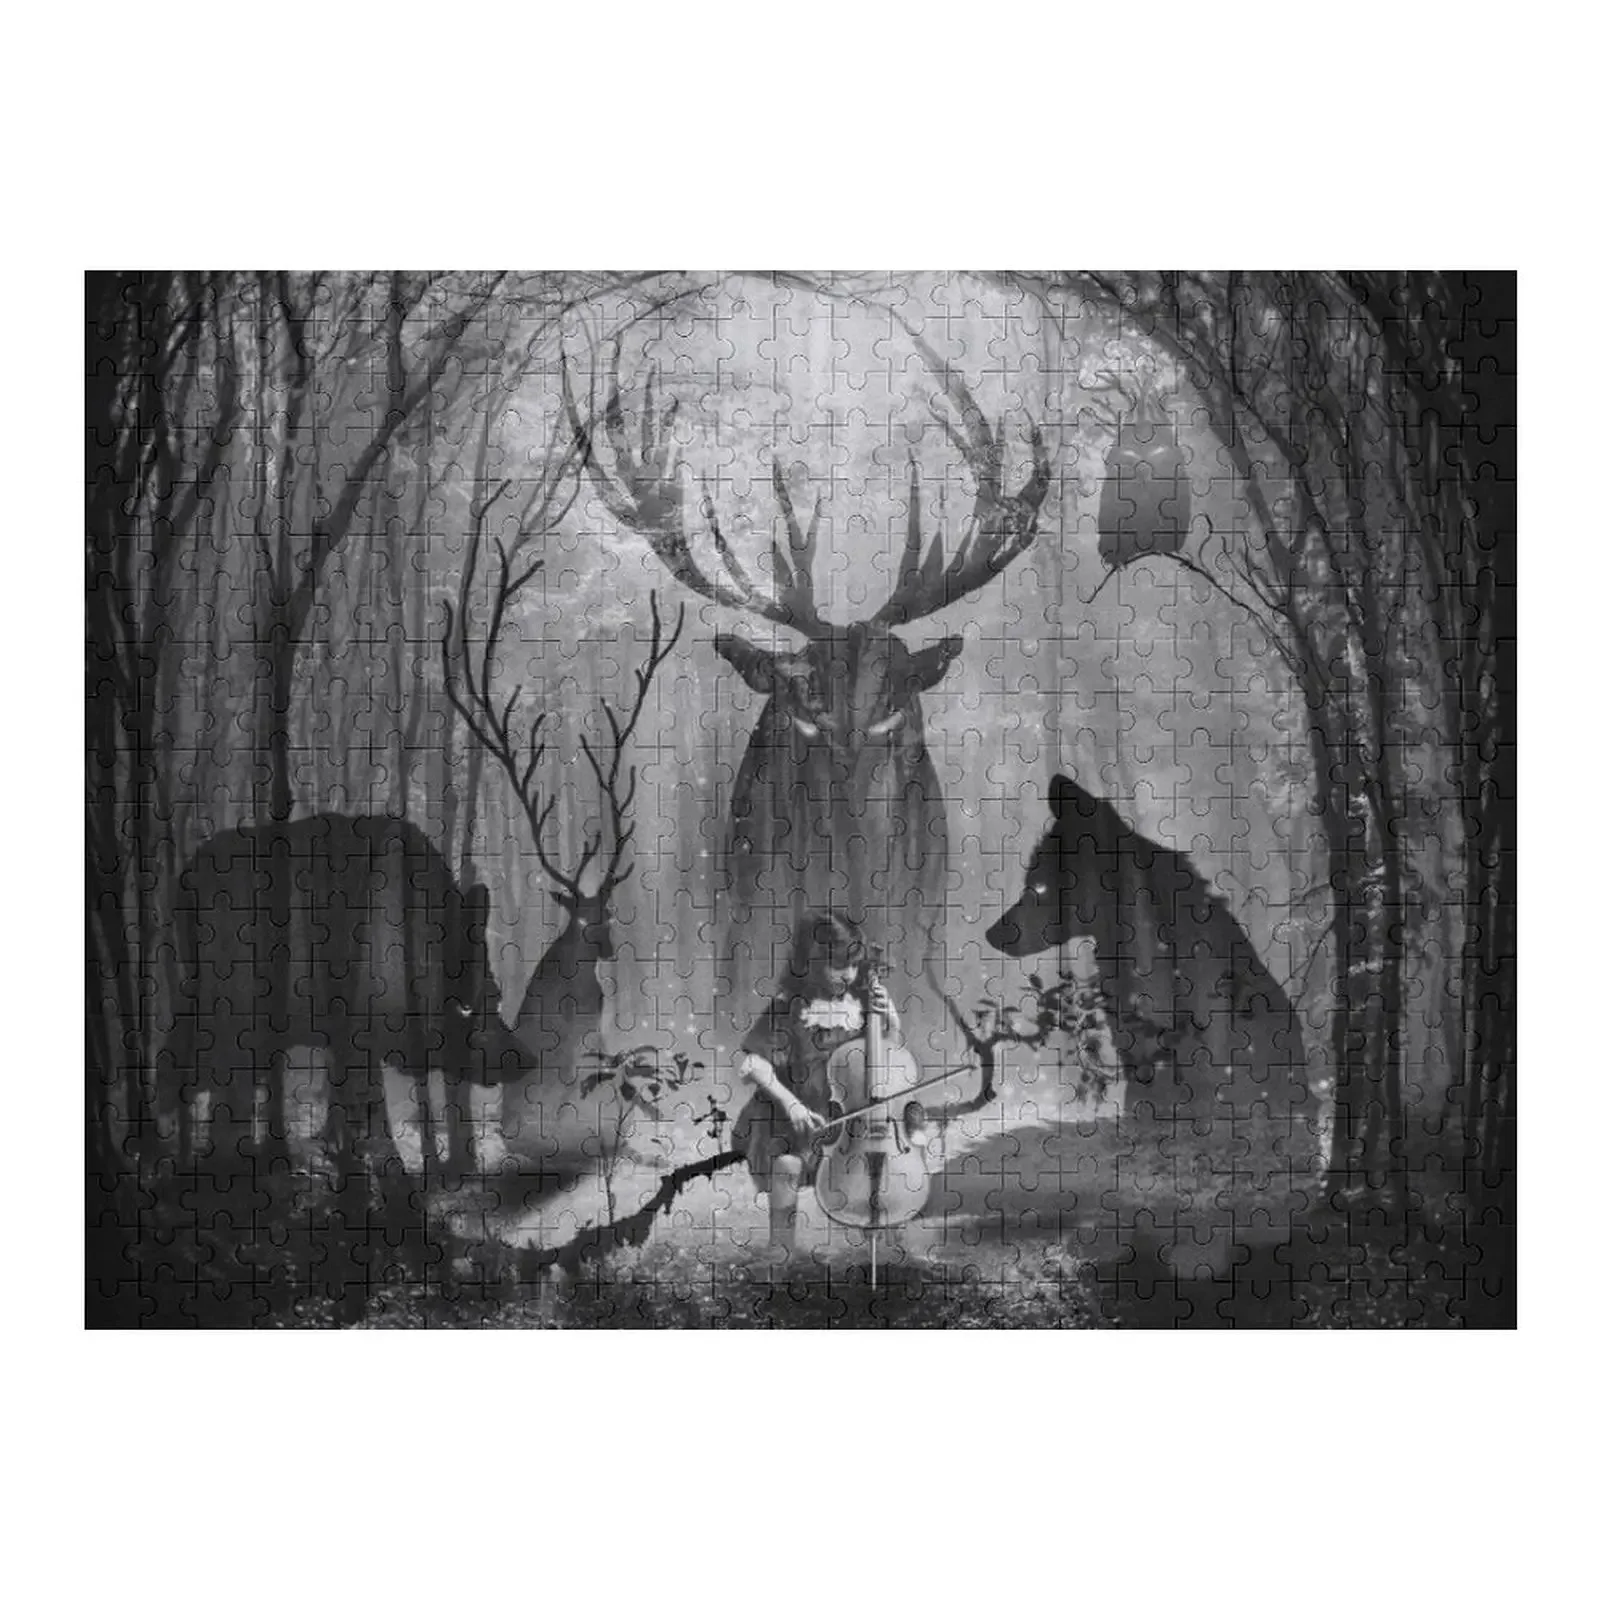 Fox Wolf Deer and Forest Cello Music Jigsaw Puzzle Customizable Gift Picture Wooden Adults Puzzle pavarotti music from the motion picture